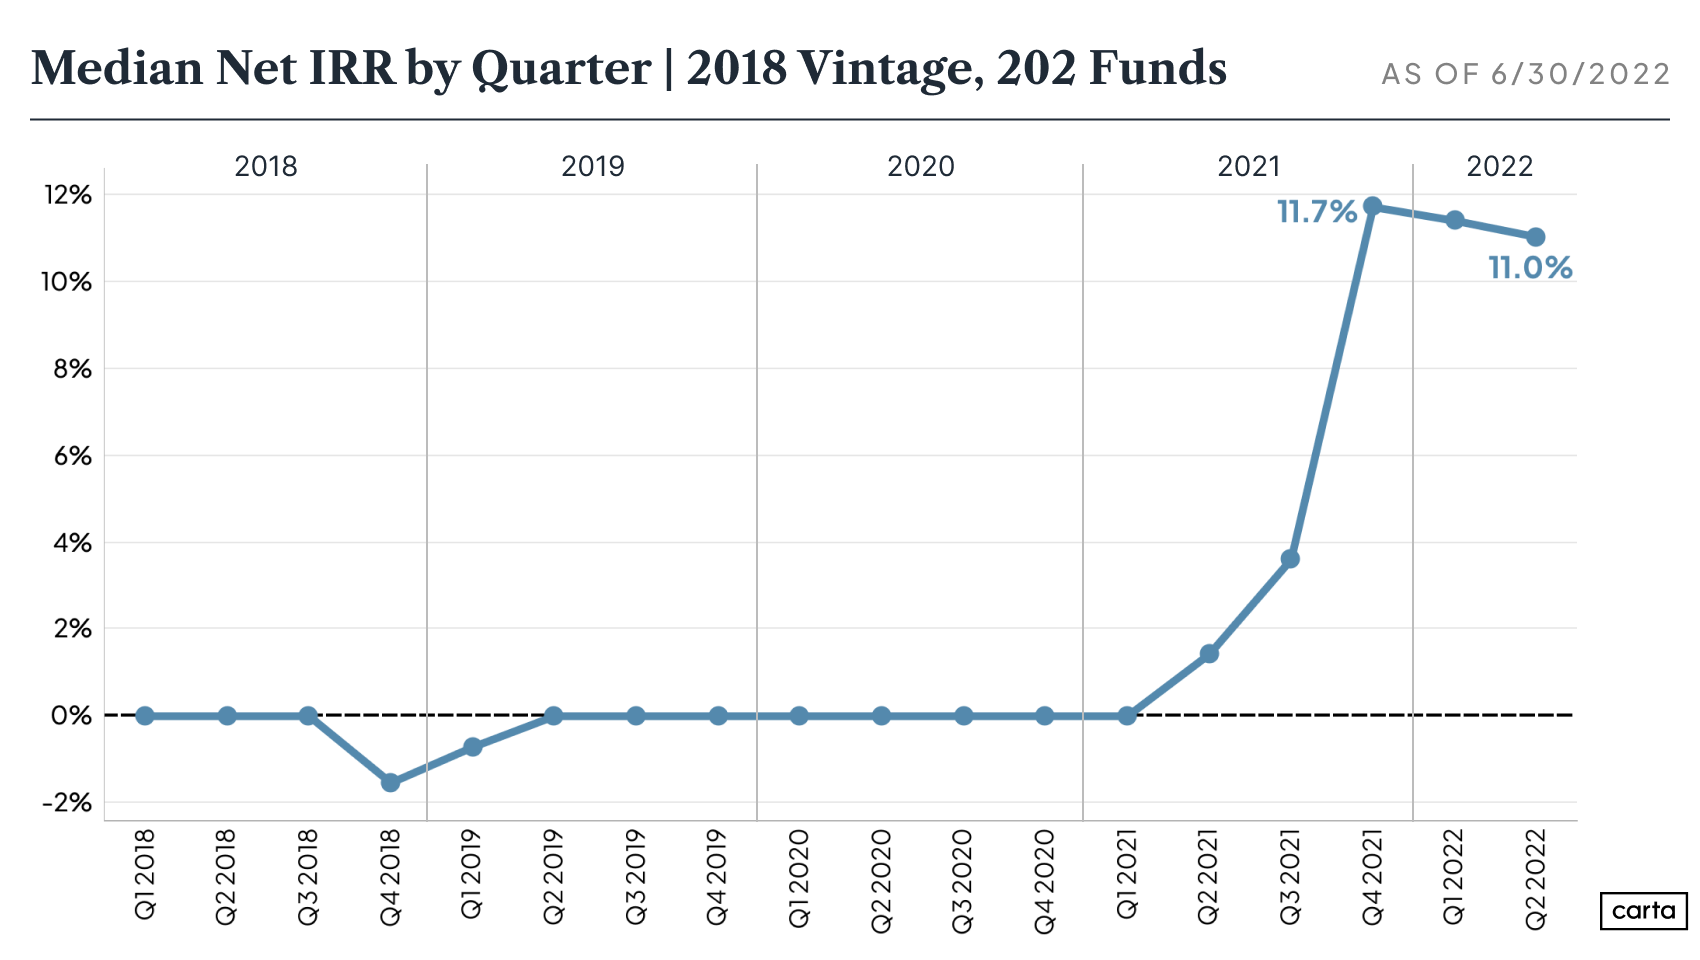 Median net IRR for 2018 vintage VC funds, showing a 0.7% decline from Q4 2021 to Q2 2022.